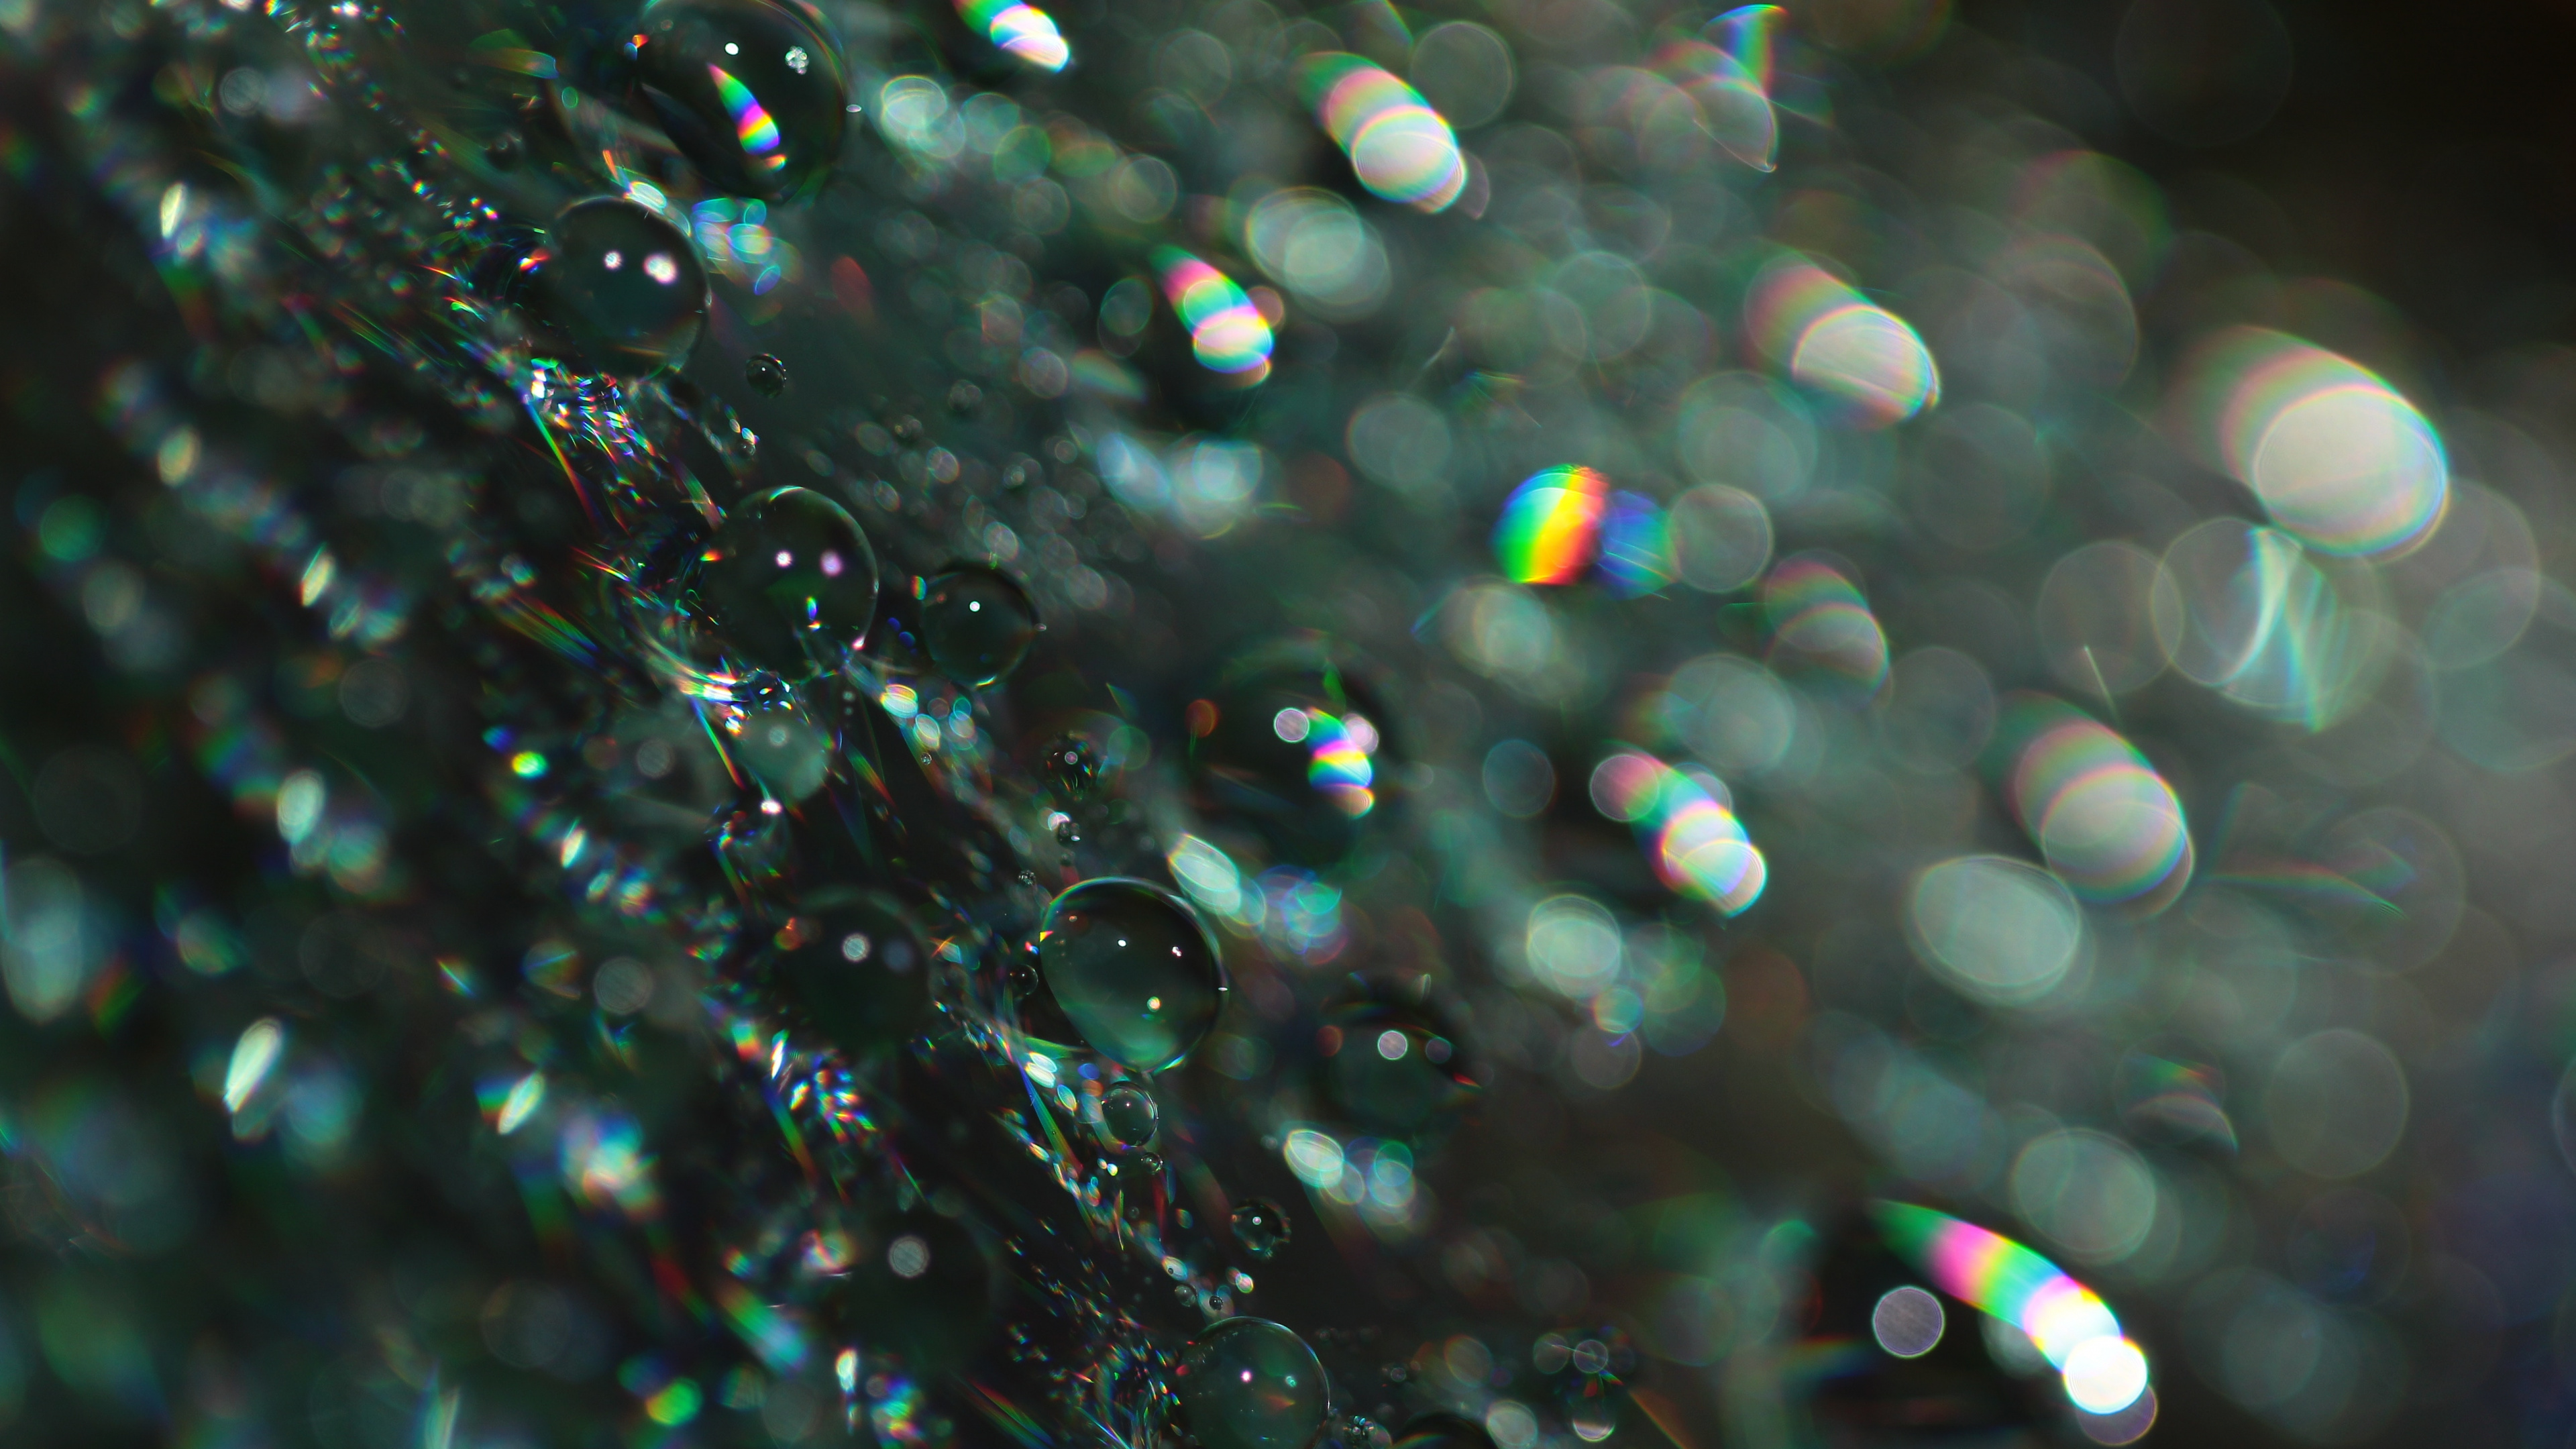 Water Droplets on Glass During Daytime. Wallpaper in 3840x2160 Resolution